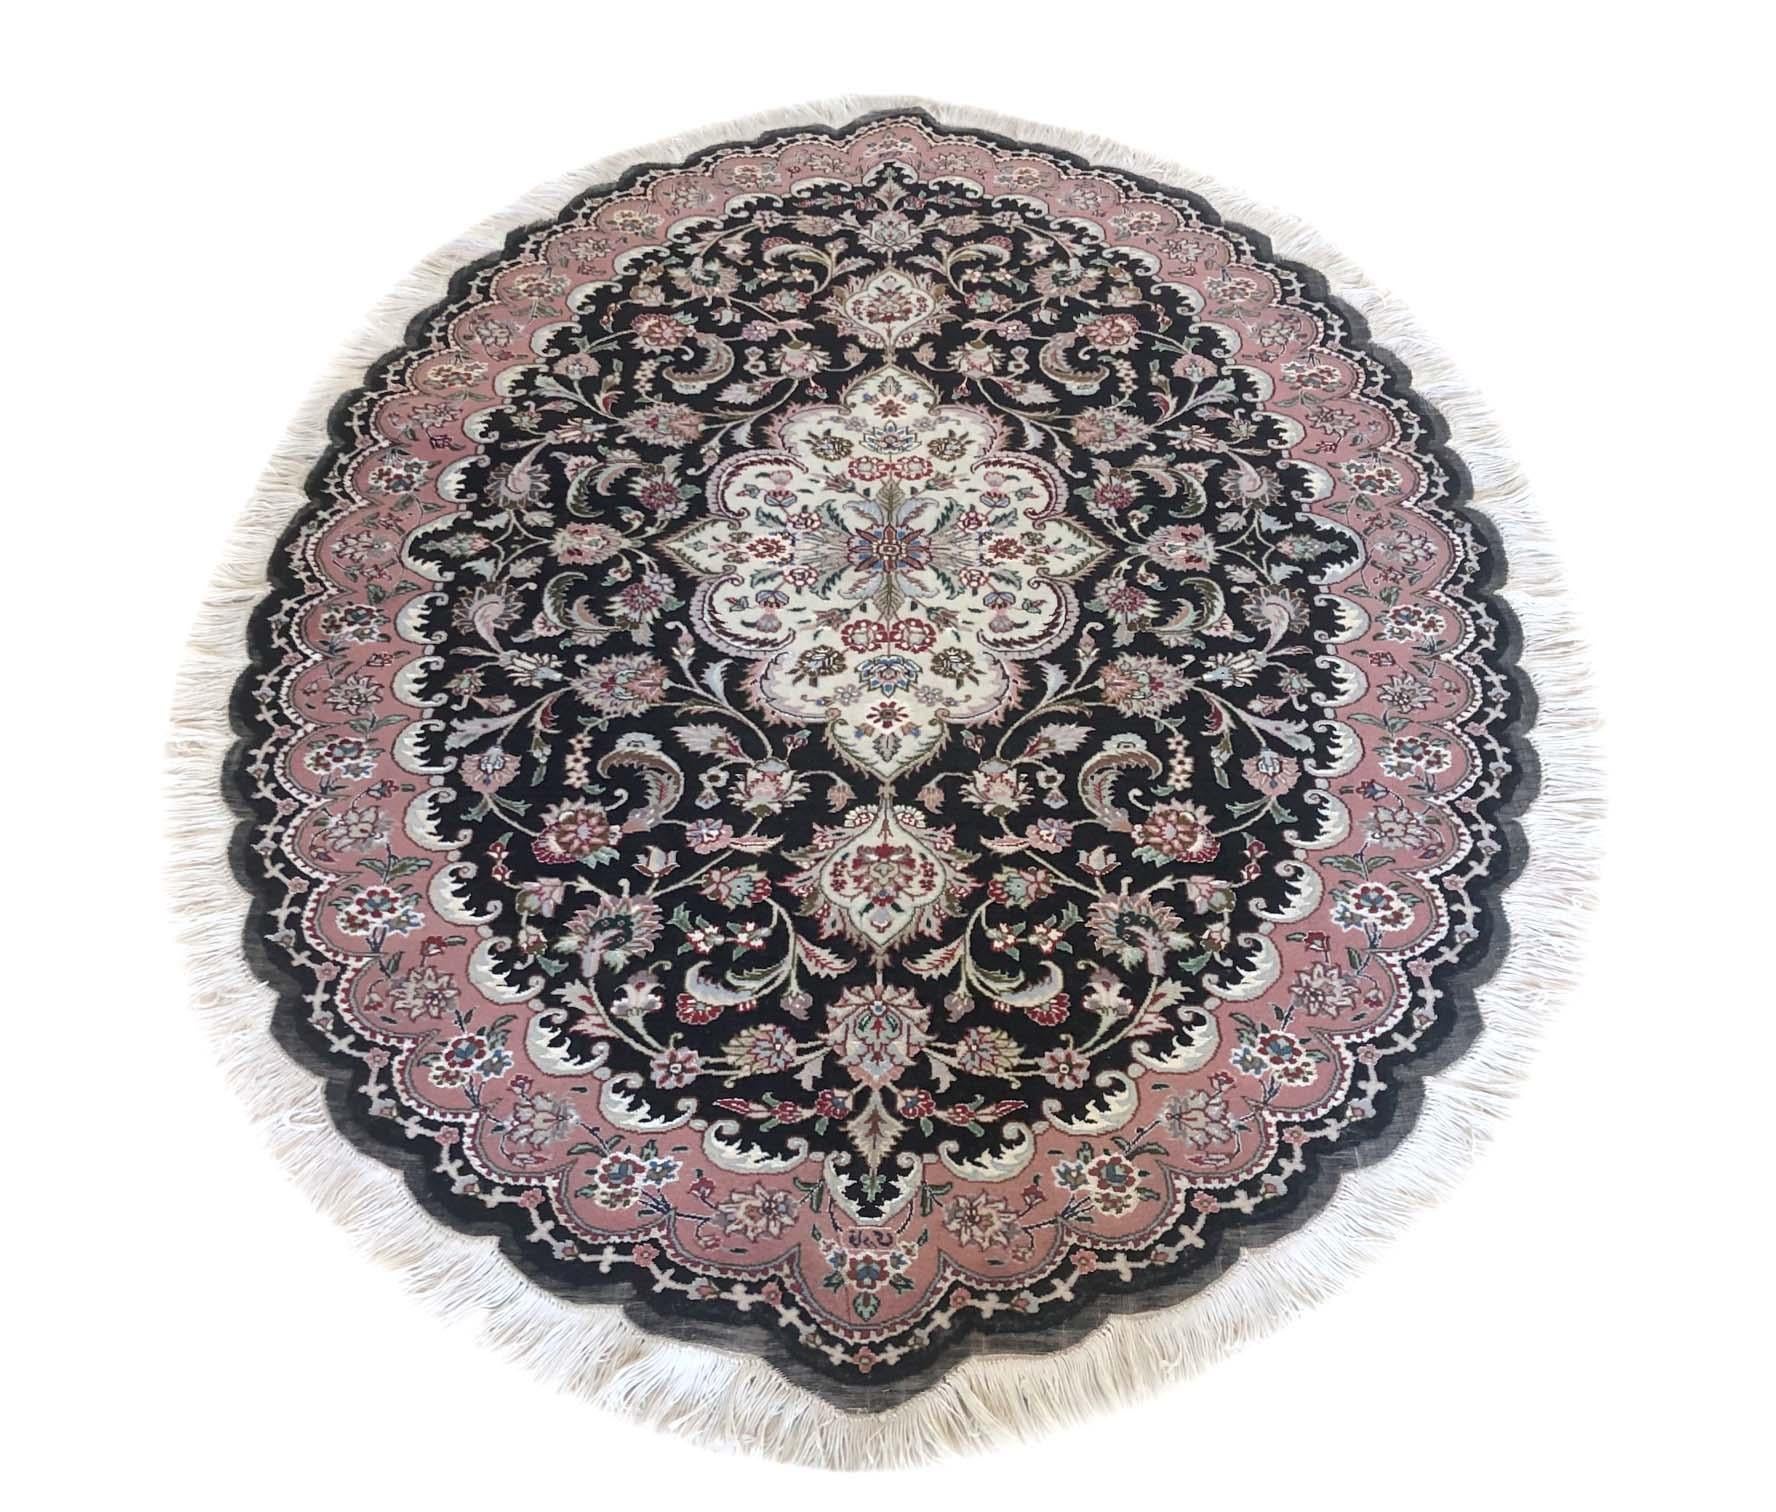 This authentic Persian handmade rug has wool and silk pile with cotton foundation. This beautiful rug is from Tabriz and the design is medallion, floral. The base color is black and the border is mauve. The size is 3 feet 5 inch by 5 feet 3 inch.